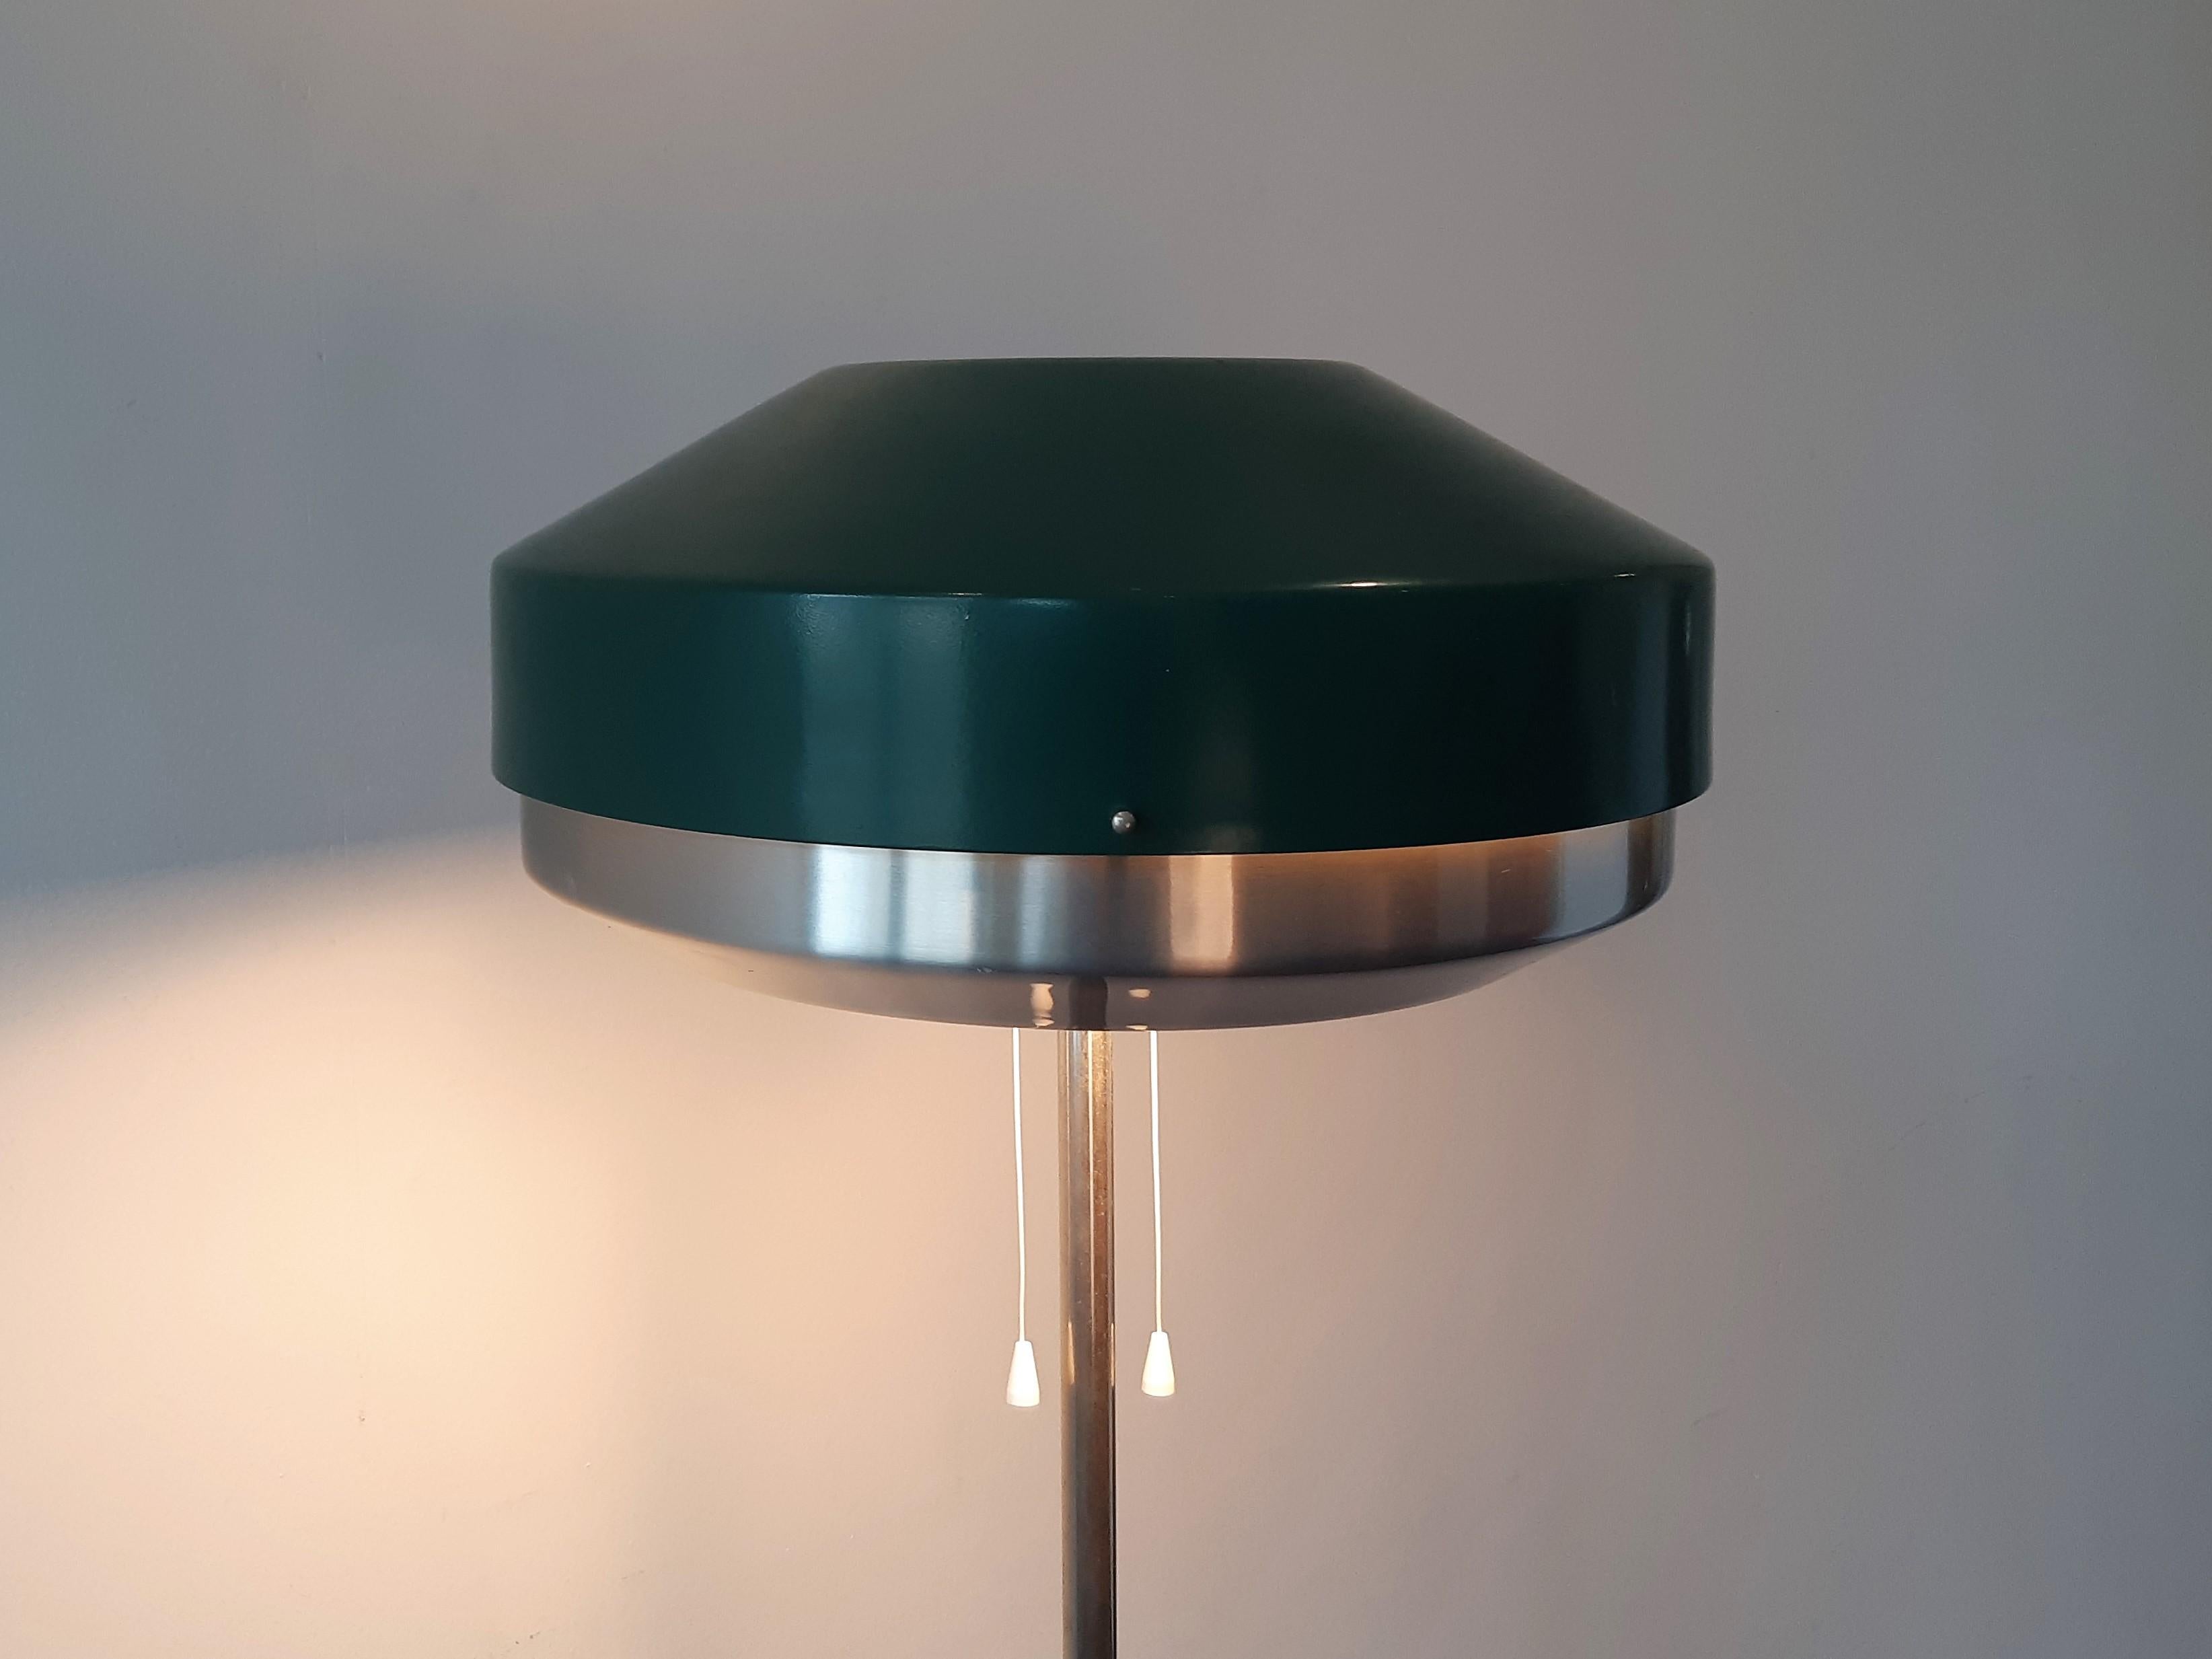 Lacquered Green Metal Floor Lamp by Willem Hagoort for Hagoort Lamps, the Netherlands 1960 For Sale